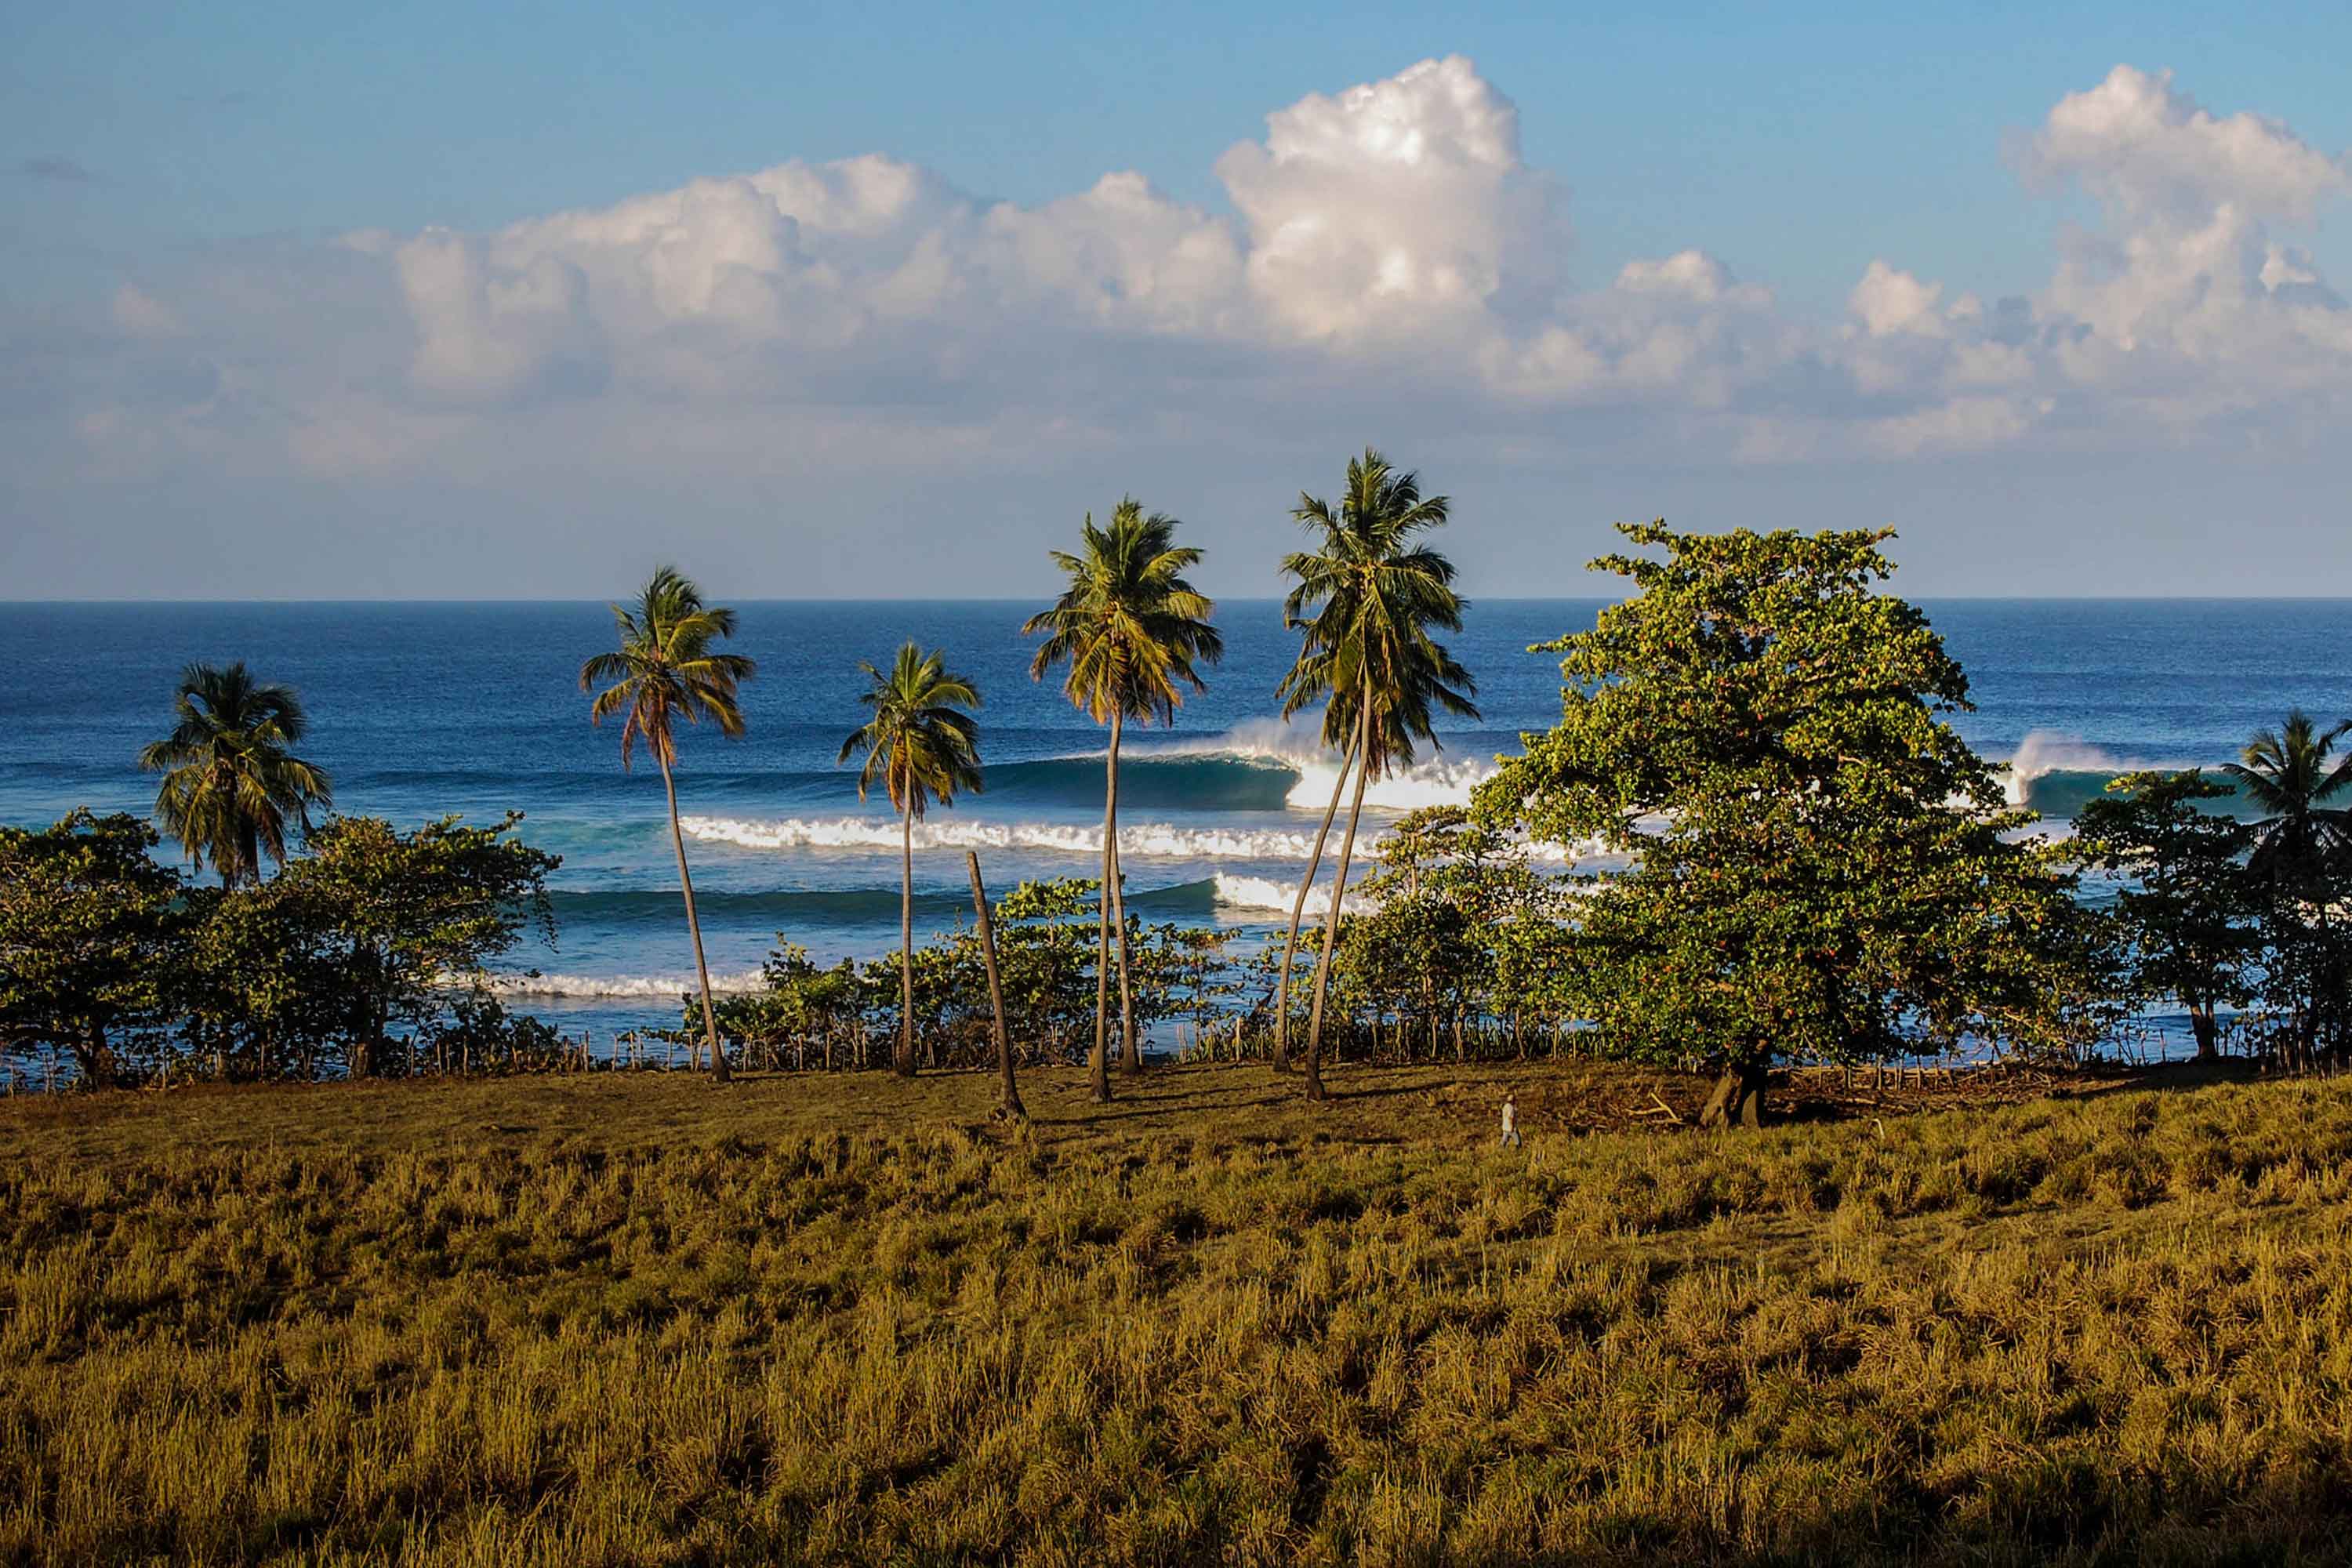 Palm trees along the coastline with small waves crashing in the background.